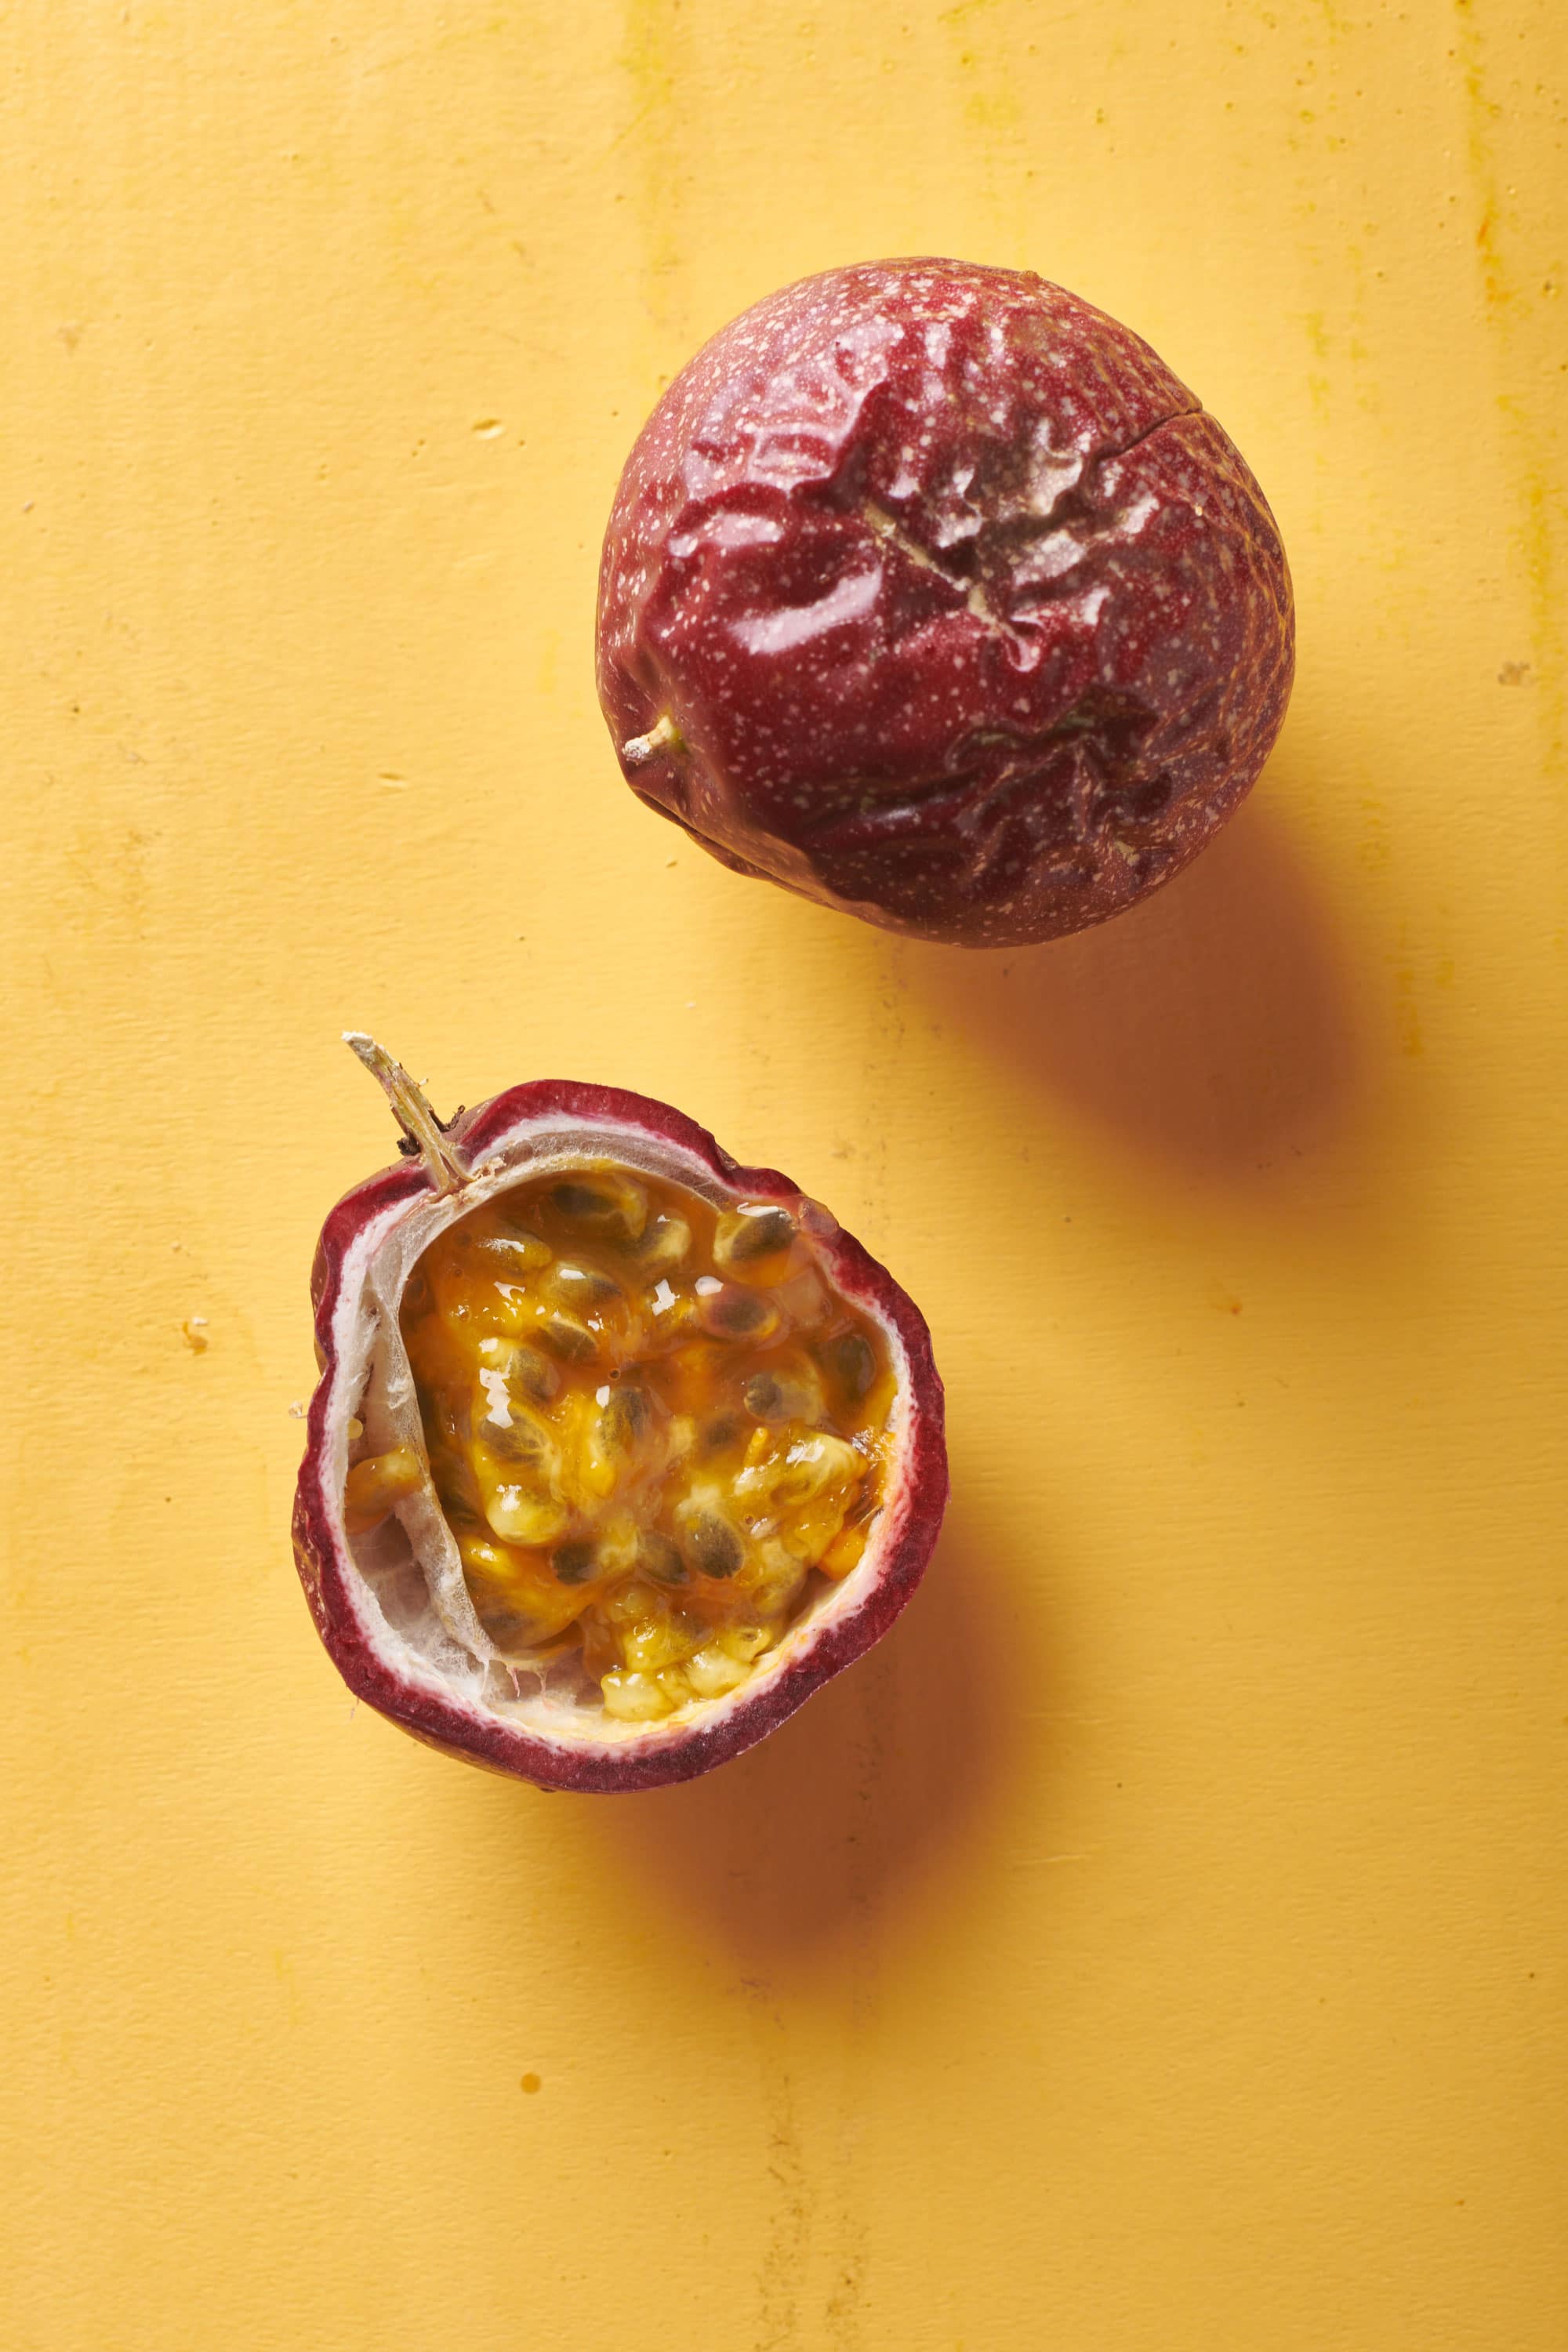 Two ripe passion fruits on a yellow surface.